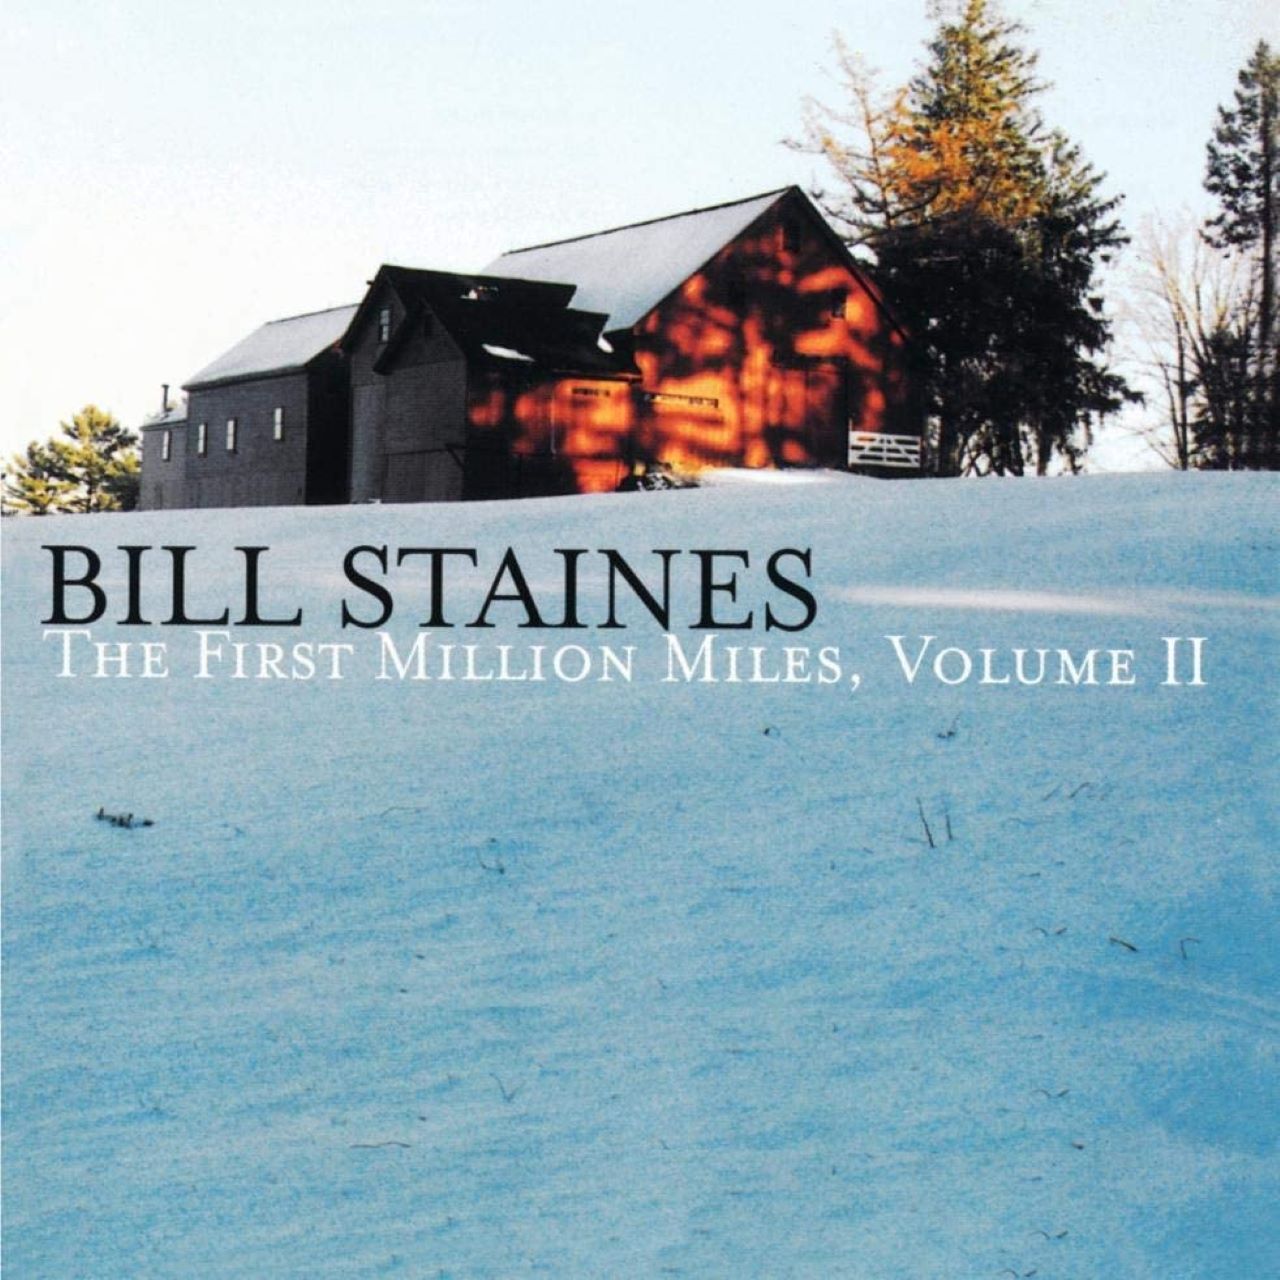 Bill Staines - The First Million Miles, Vol. II cover album